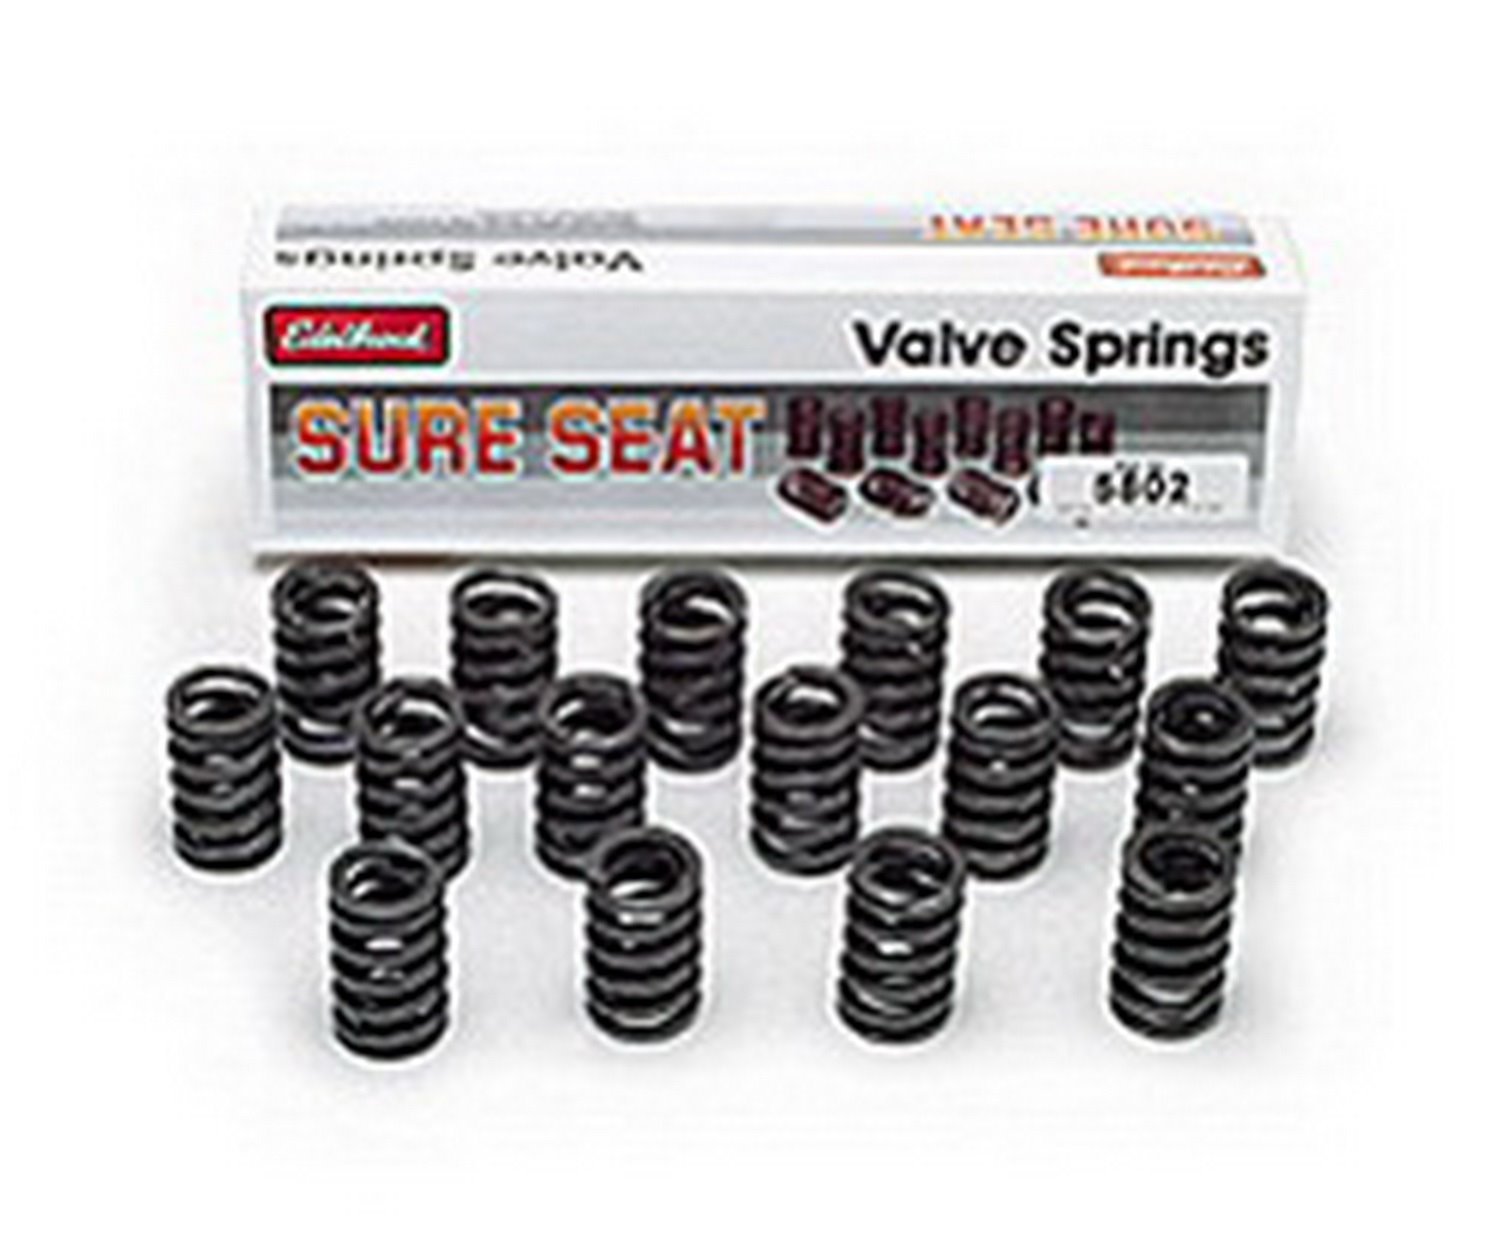 Sure Seat Valve Springs for Big Block Chevy